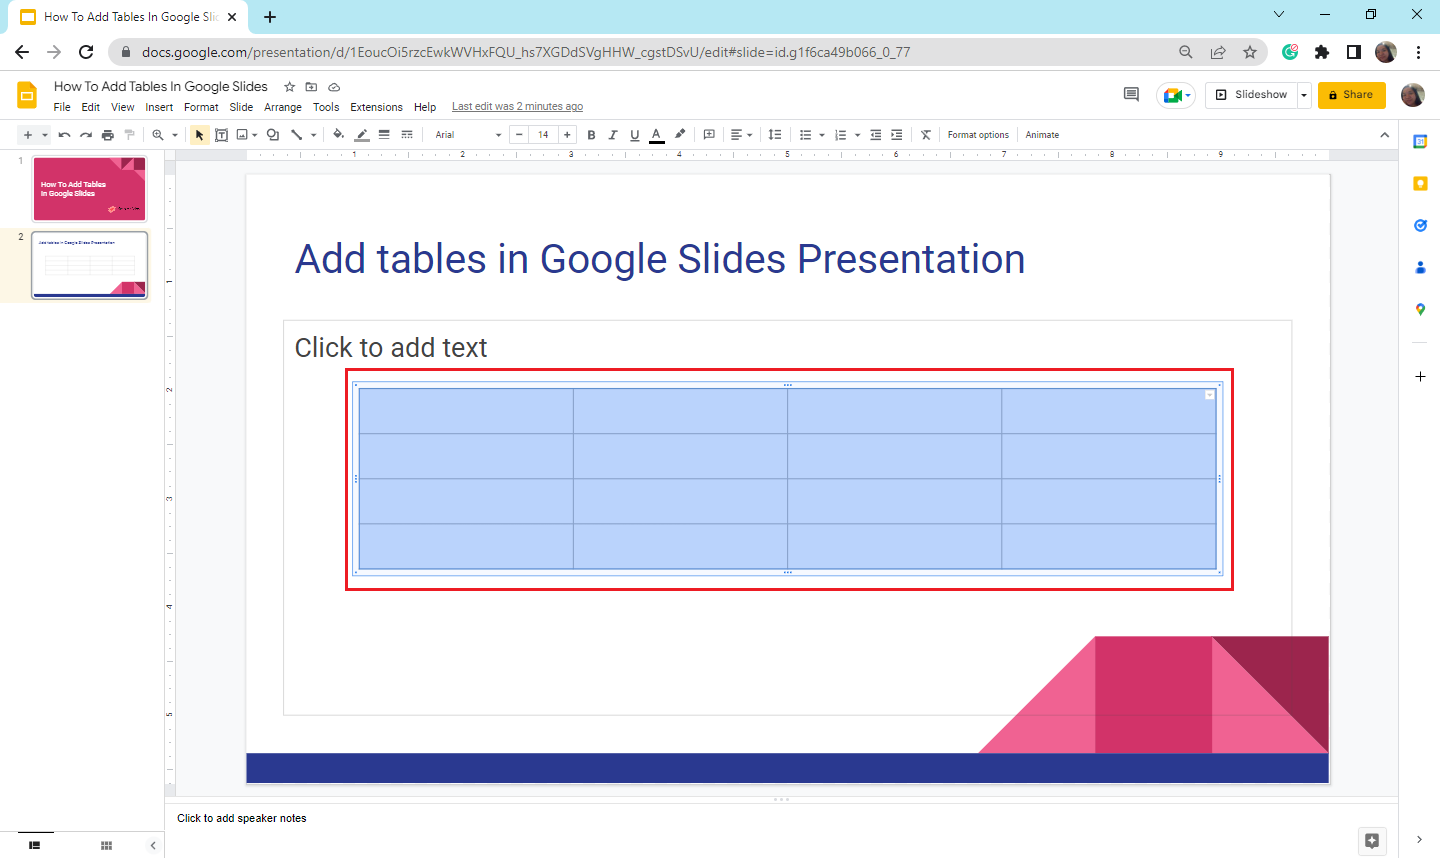 select a cell in your table in Google Slides ang right Click it.